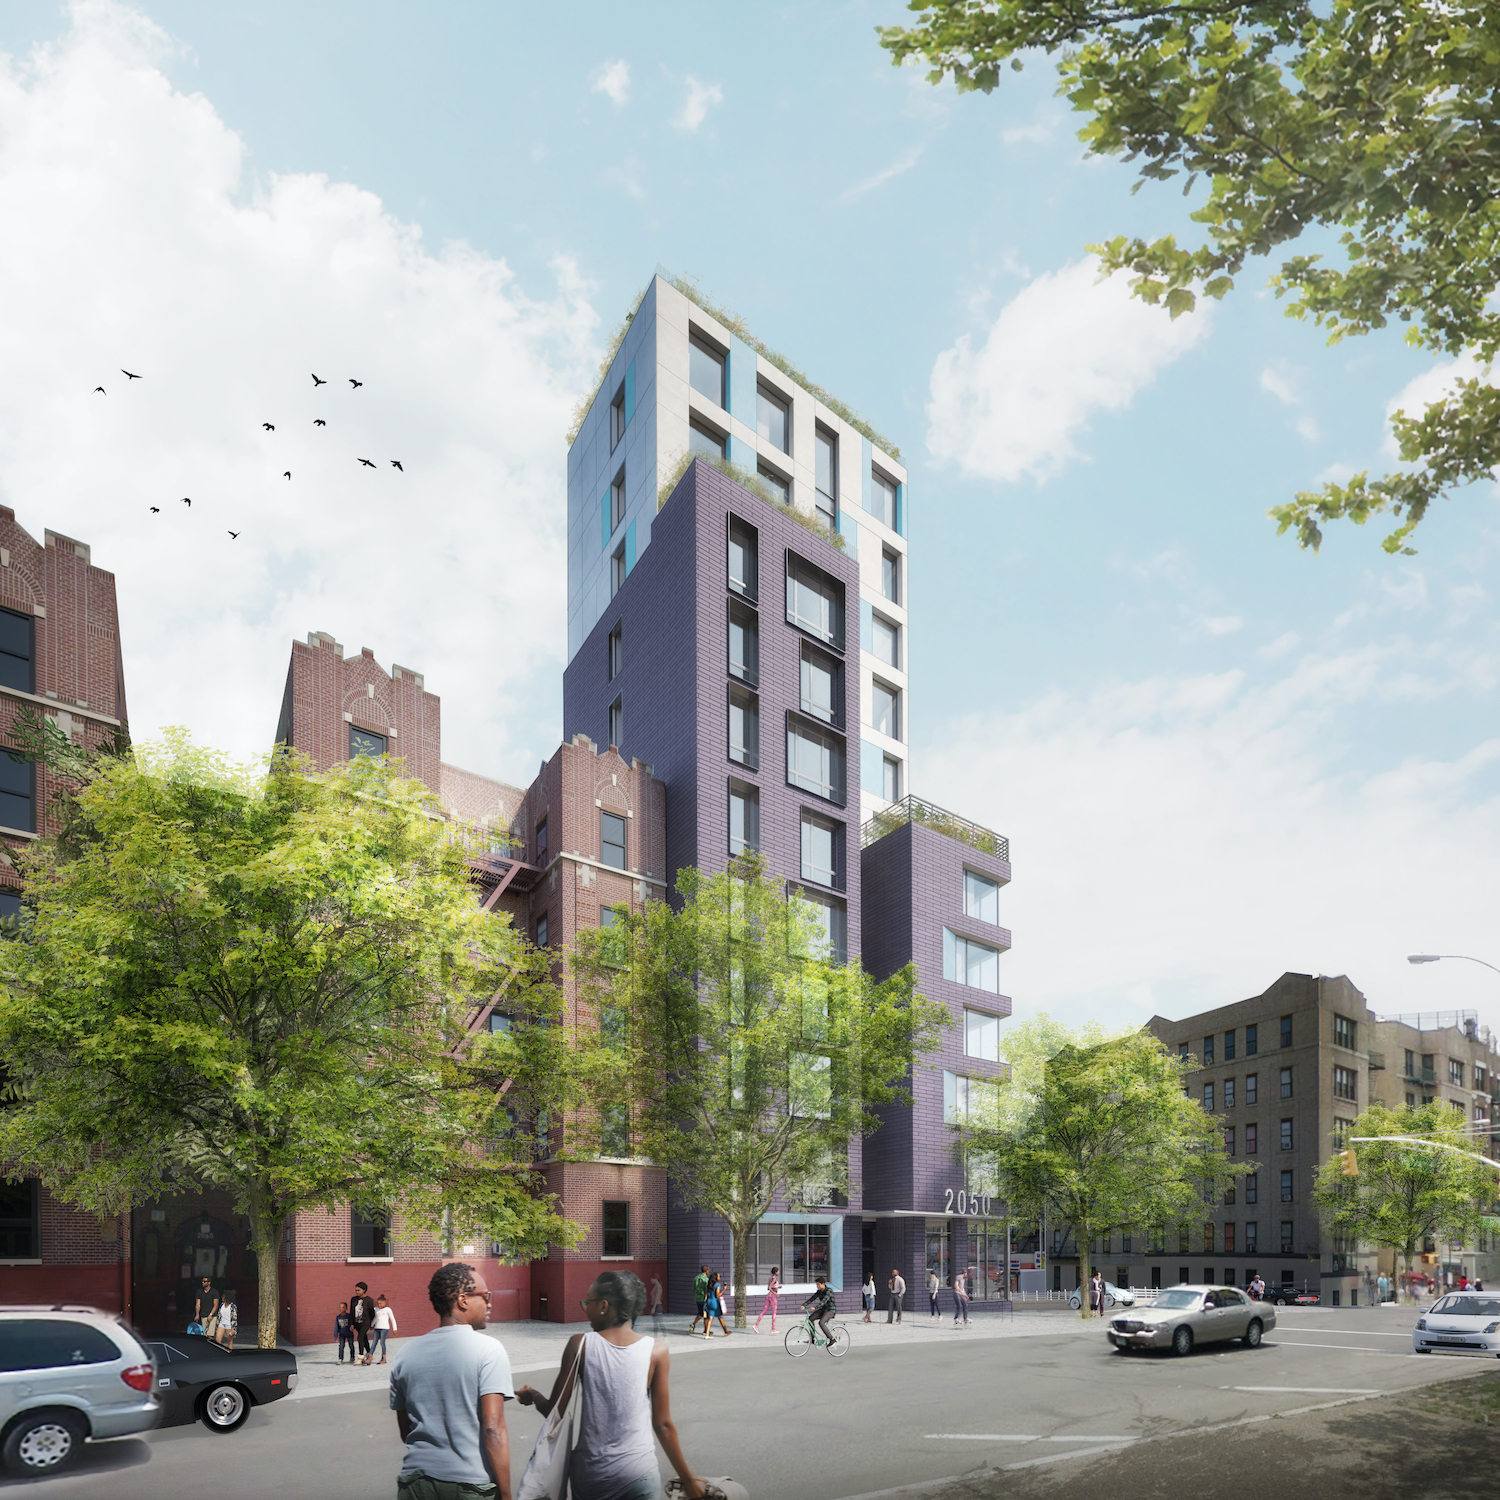 2050 Grand Concourse. Rendering by Nightnurse Images.